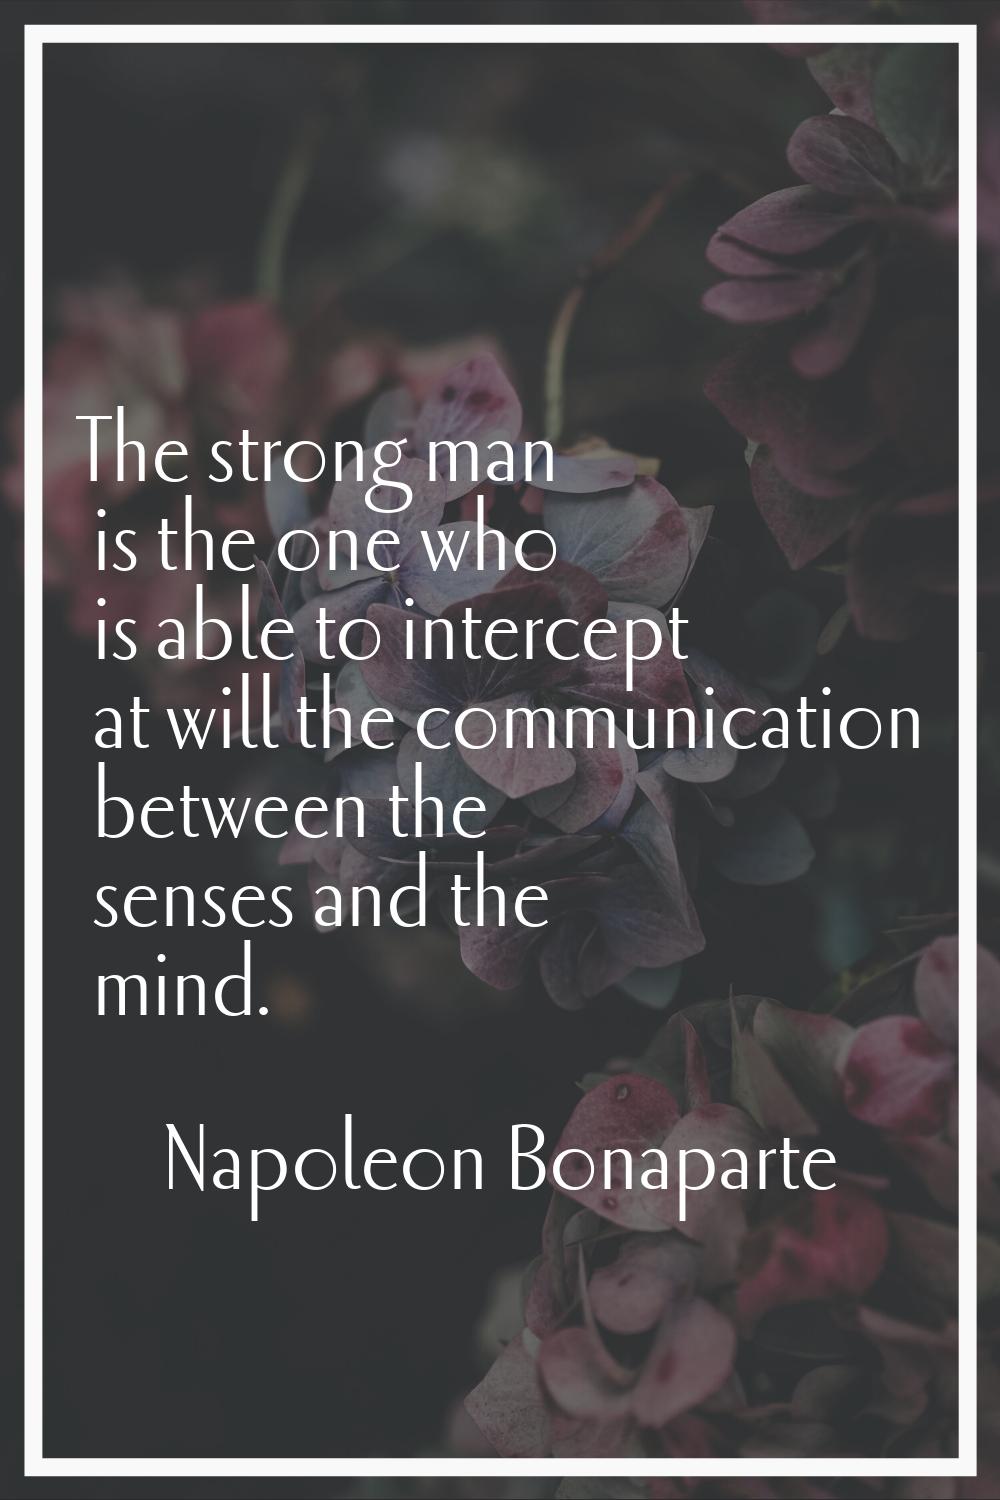 The strong man is the one who is able to intercept at will the communication between the senses and